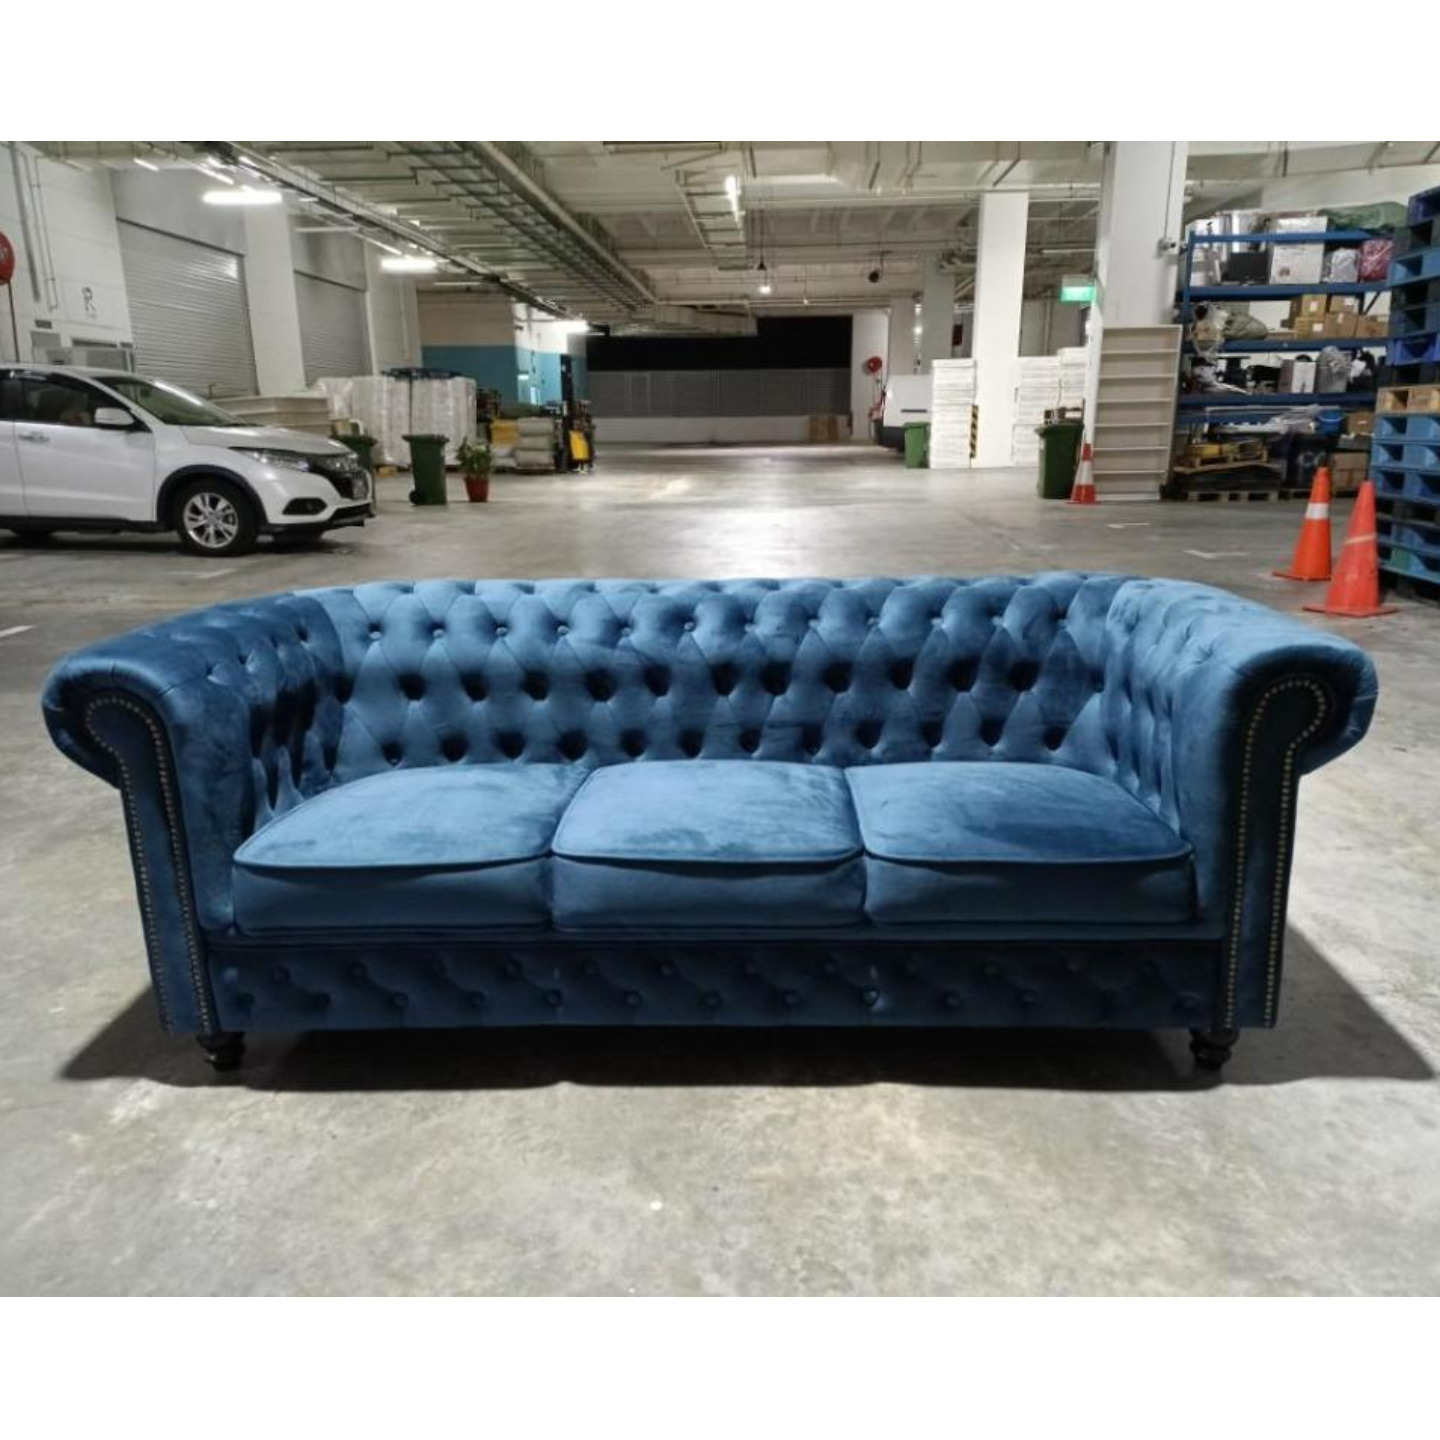 (PRE ORDER) SALVADORE X 3 Seater Chesterfield Sofa in MIDNIGHT BLUE VELVET - Estimated Delivery by JULY 2023